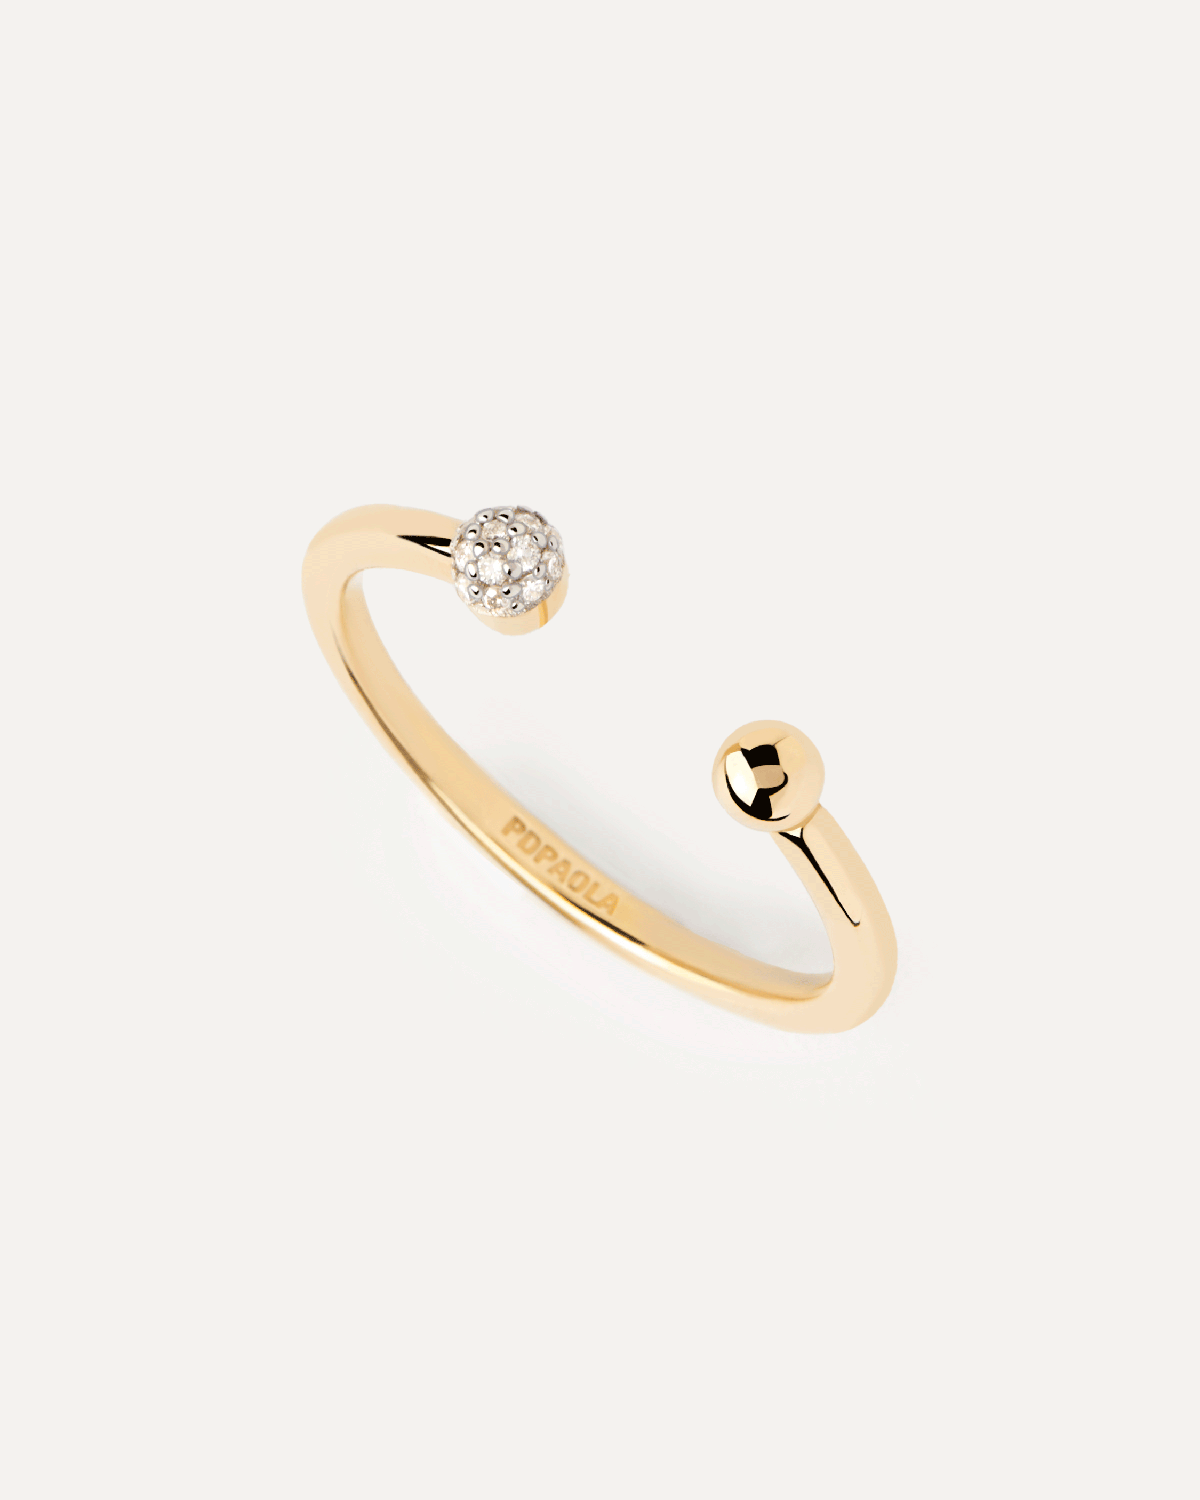 Diamonds and gold Clara ring. You-and-me open ring in solid 18K yellow gold set with pavé lab-grown diamonds . Get the latest arrival from PDPAOLA. Place your order safely and get this Best Seller.